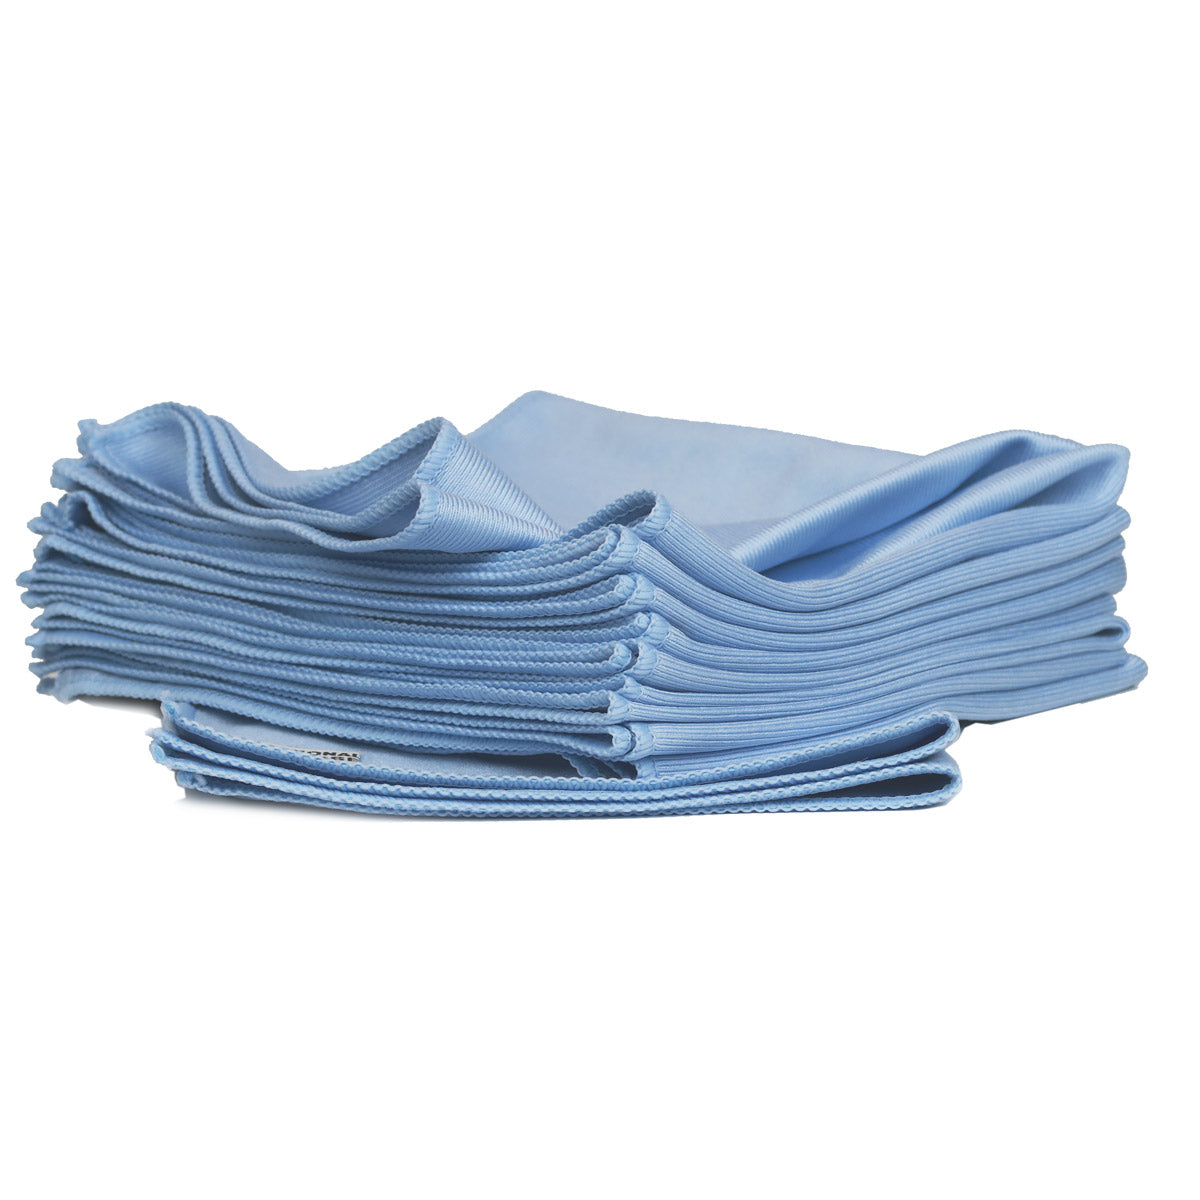 Glass Cleaning Microfibre Cloths 40cms x 48cms - 2 pack